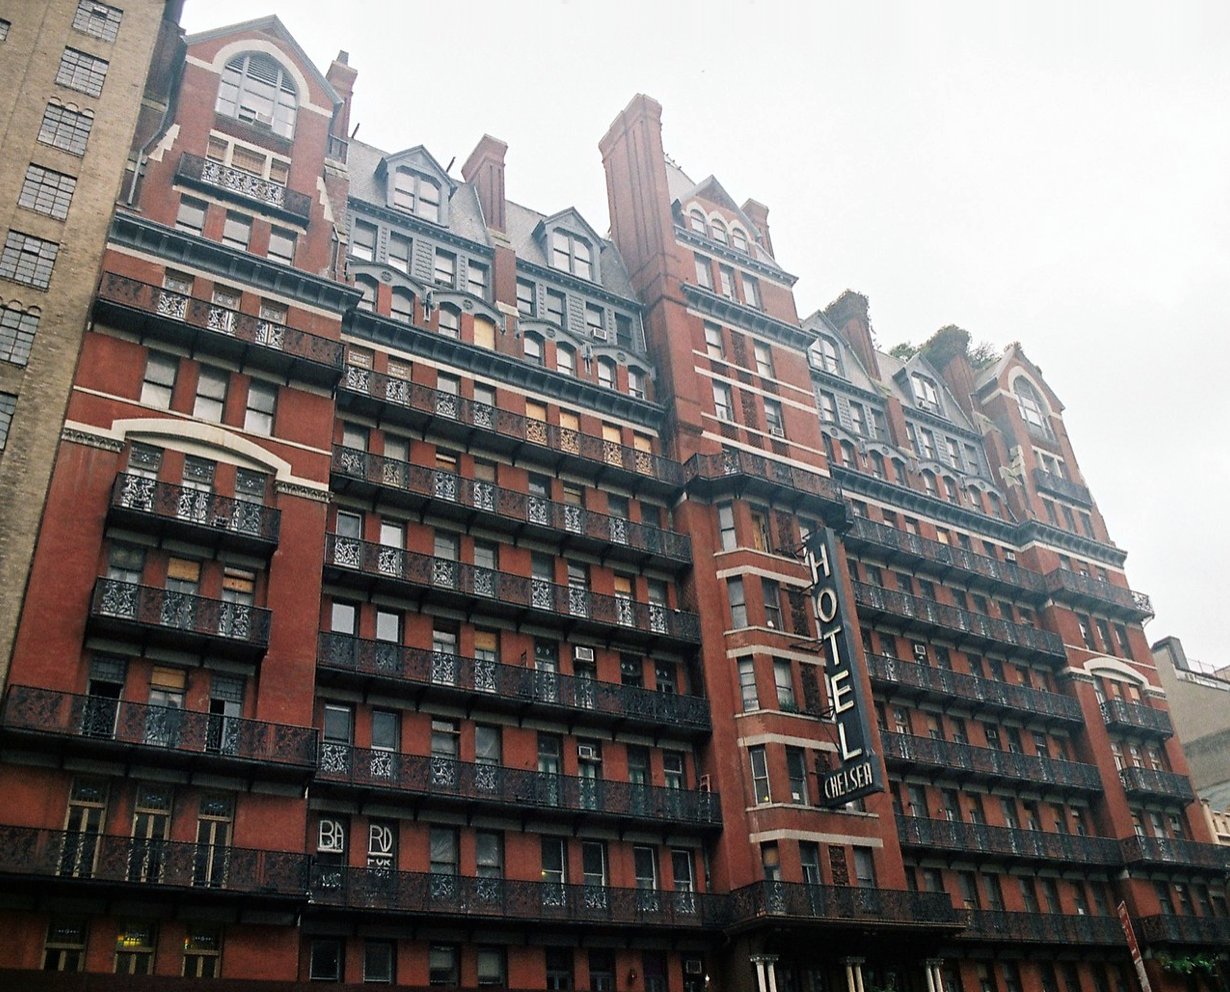 The Chelsea Hotel. Photo by @k_tjaaa 2014. Sourced from Flickr